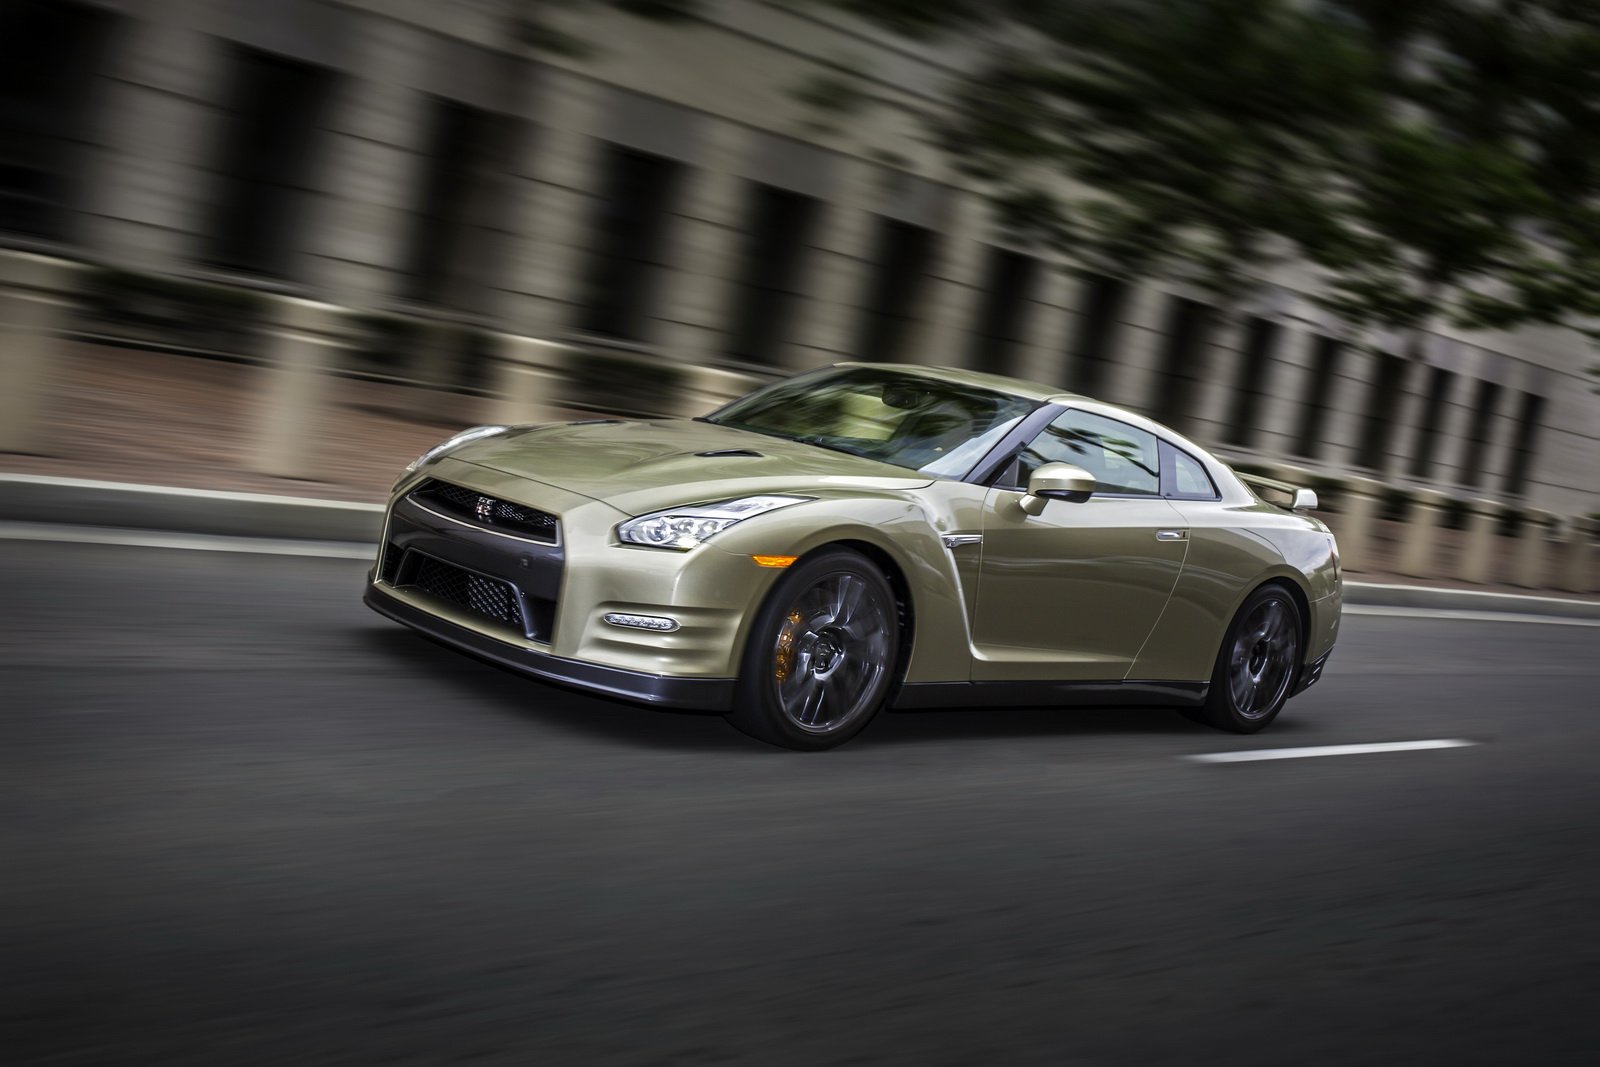 2016, Nissan, Gt r, 45th, Anniversary, Gold, Edition, Cars Wallpaper